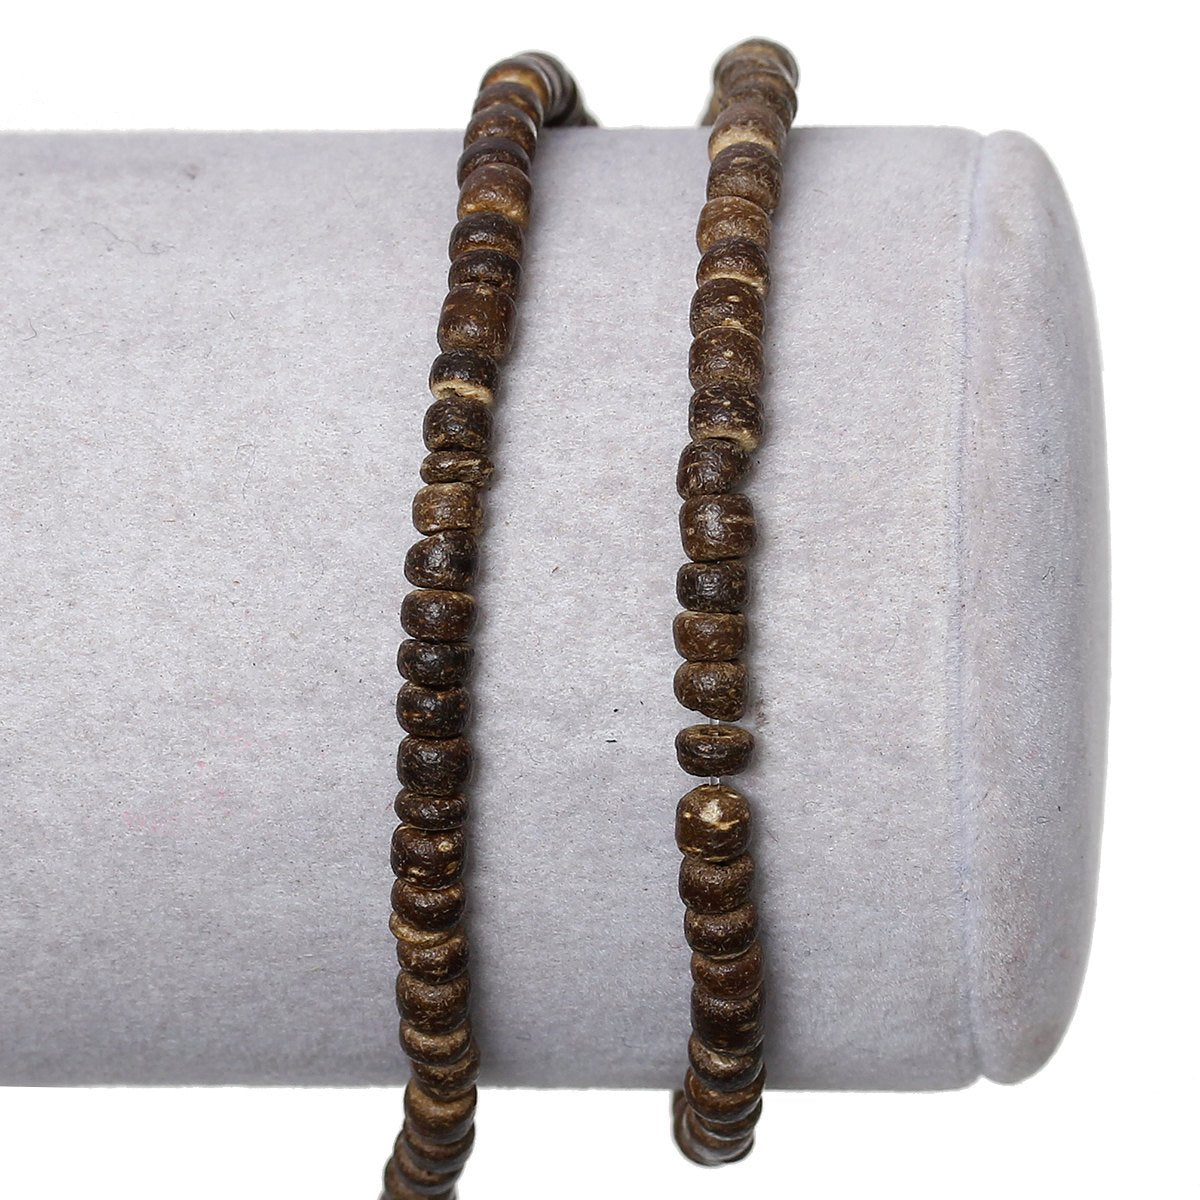 140 Natural brown coconut wood beads 4mm